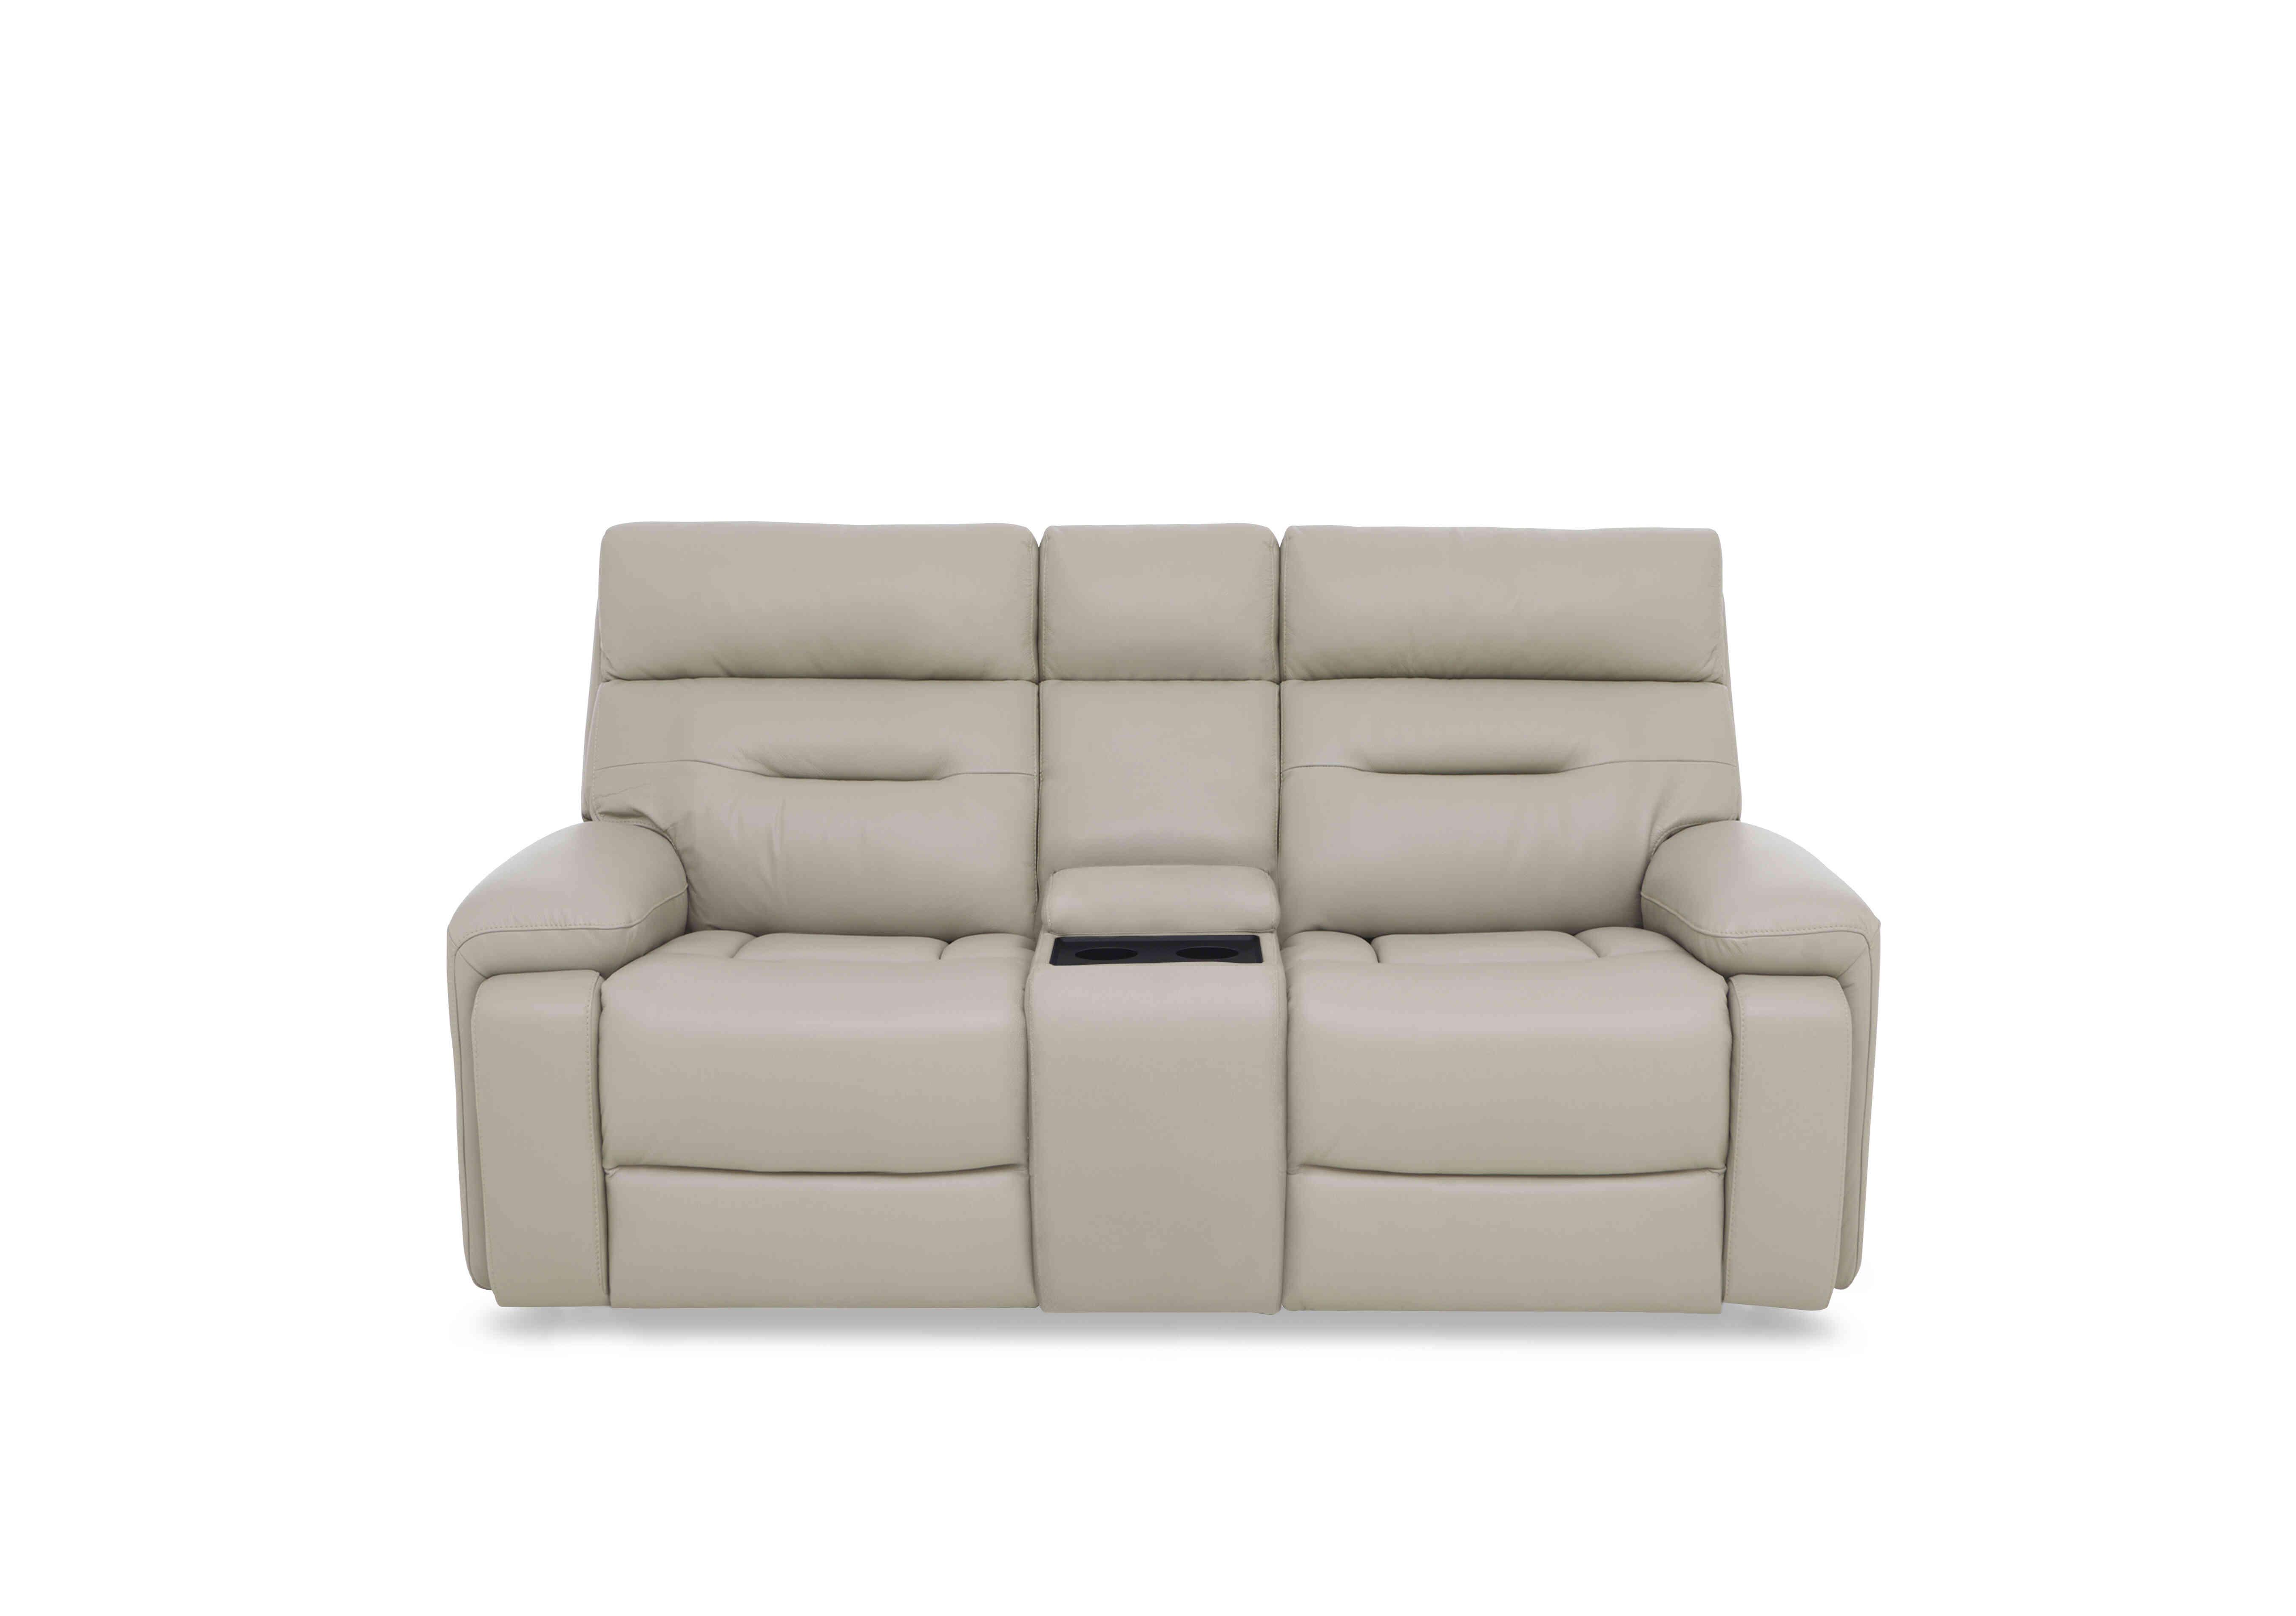 Cinemax Media 2 Seater Leather Power Recliner Sofa with Power Headrests in Le-9303 Sand on Furniture Village